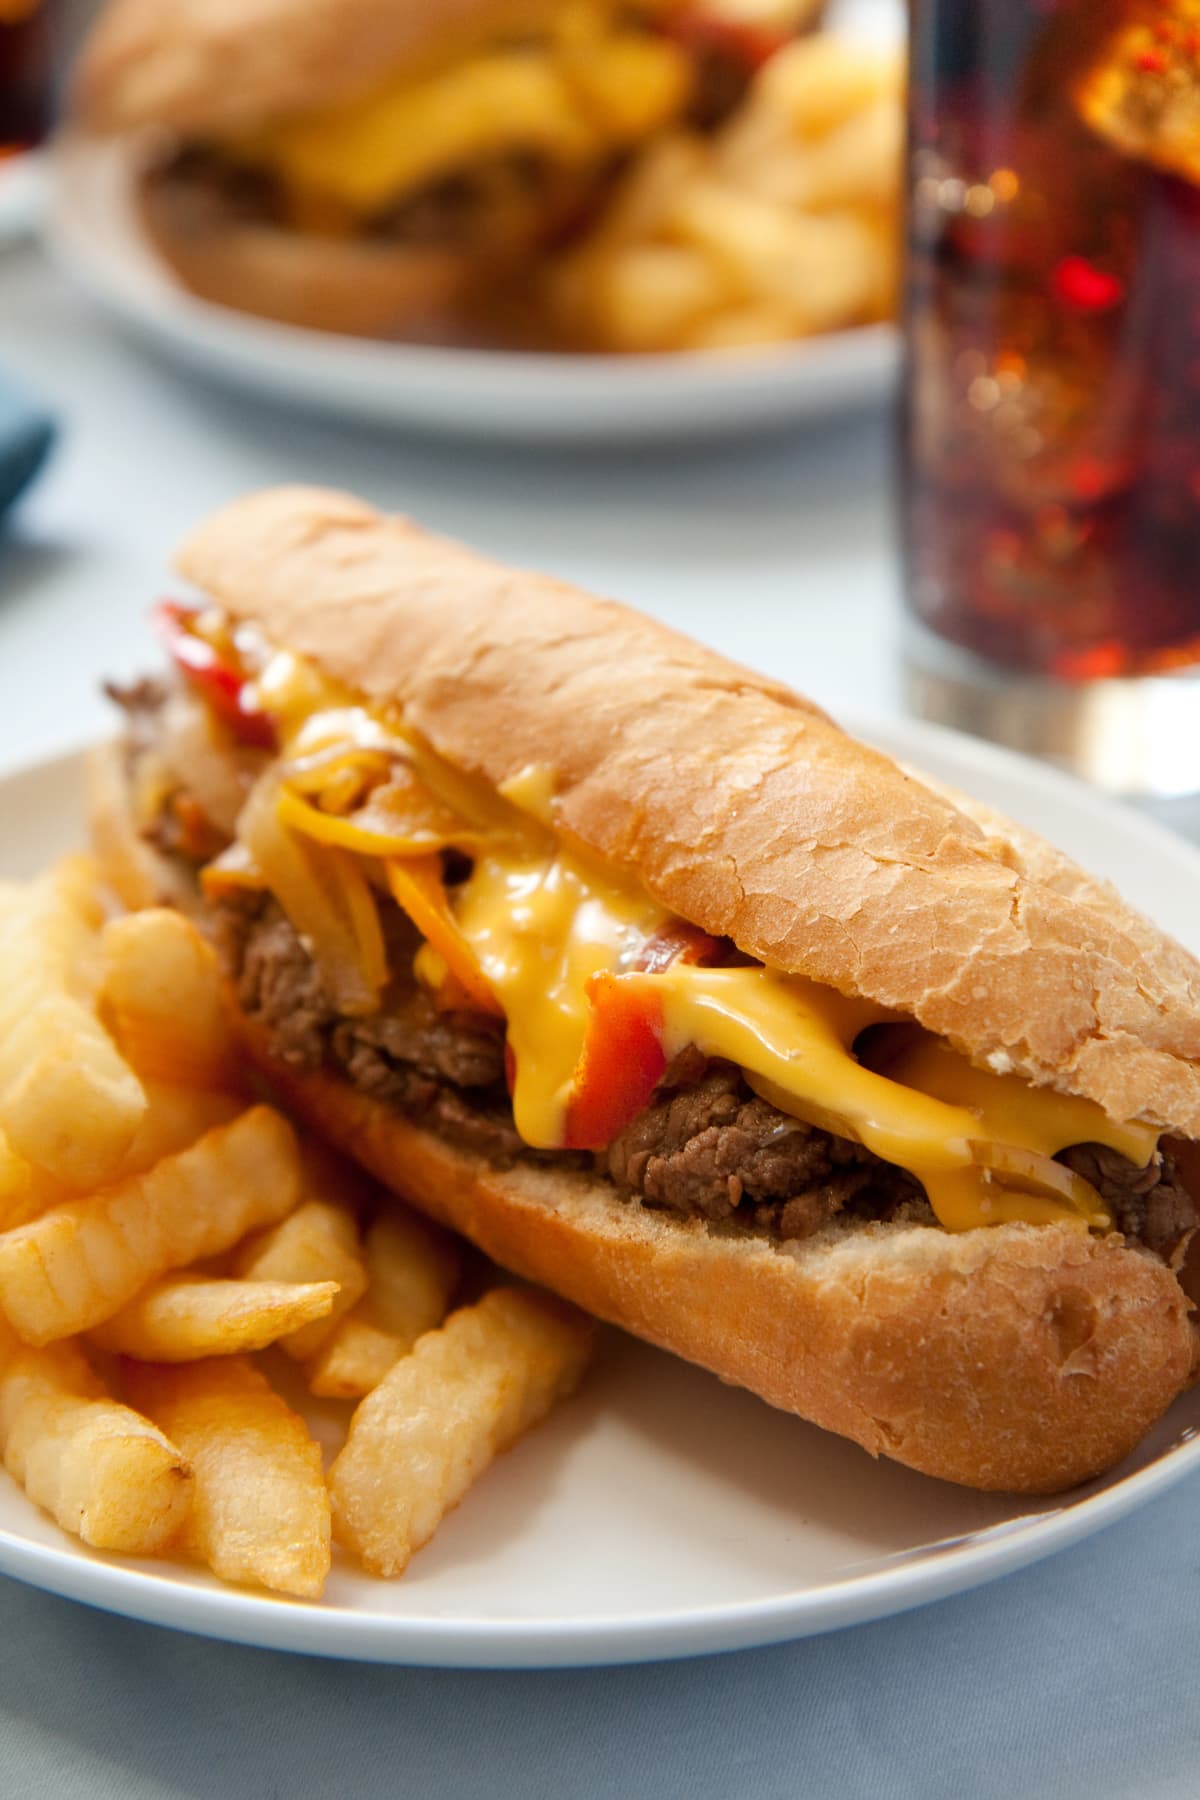 Philly cheesesteak on plate with fries